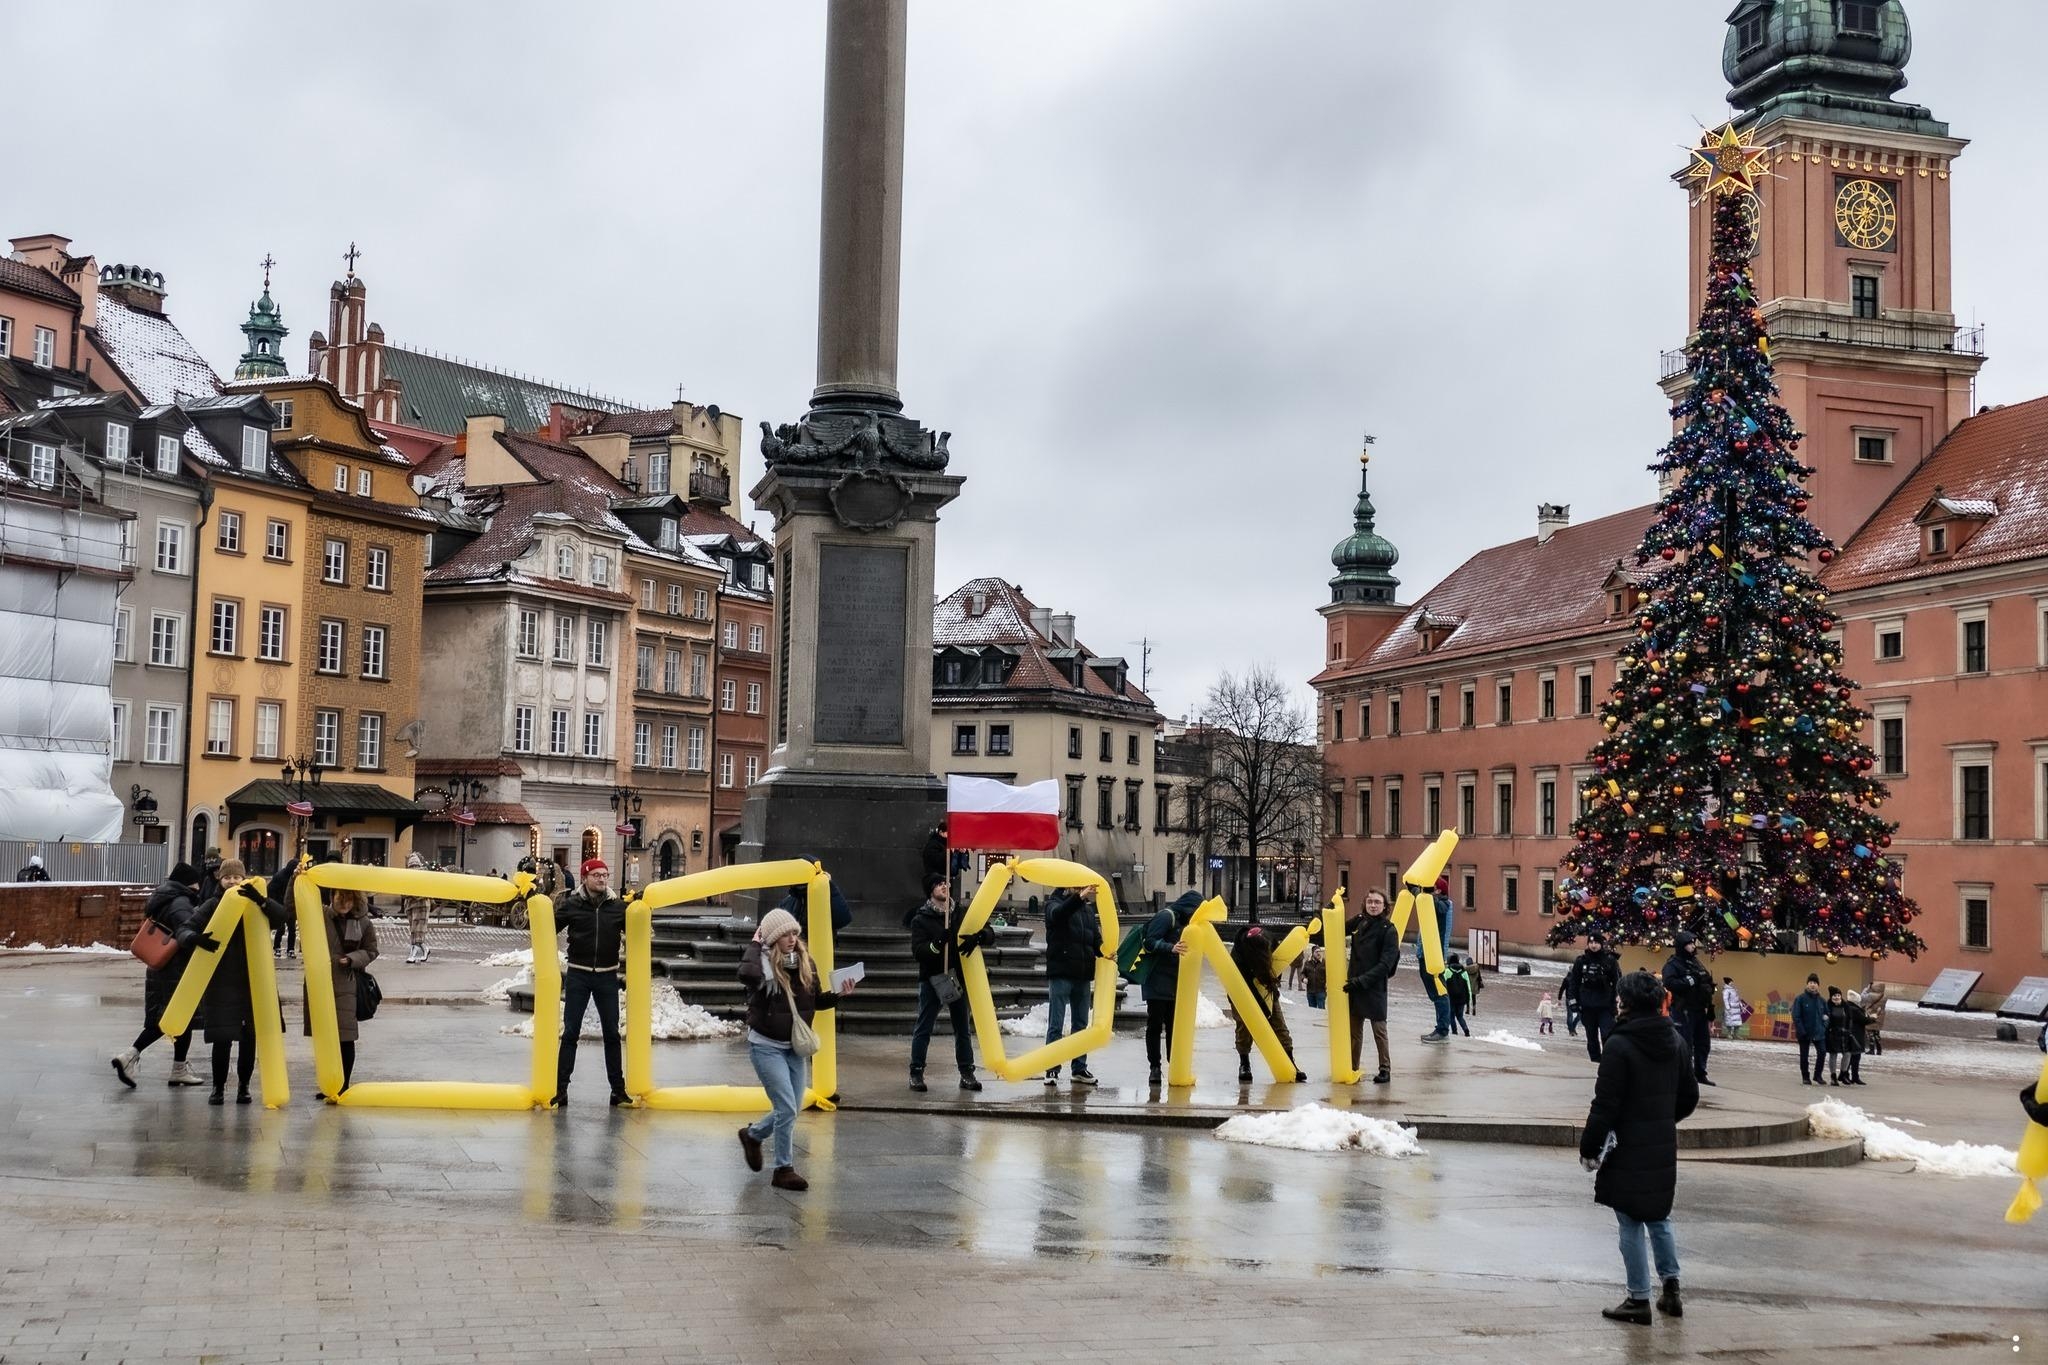 Holding the first ZERO is our chair Hanna Gawronska - Spiewak // A demonstration in Warsaw marking 100 days